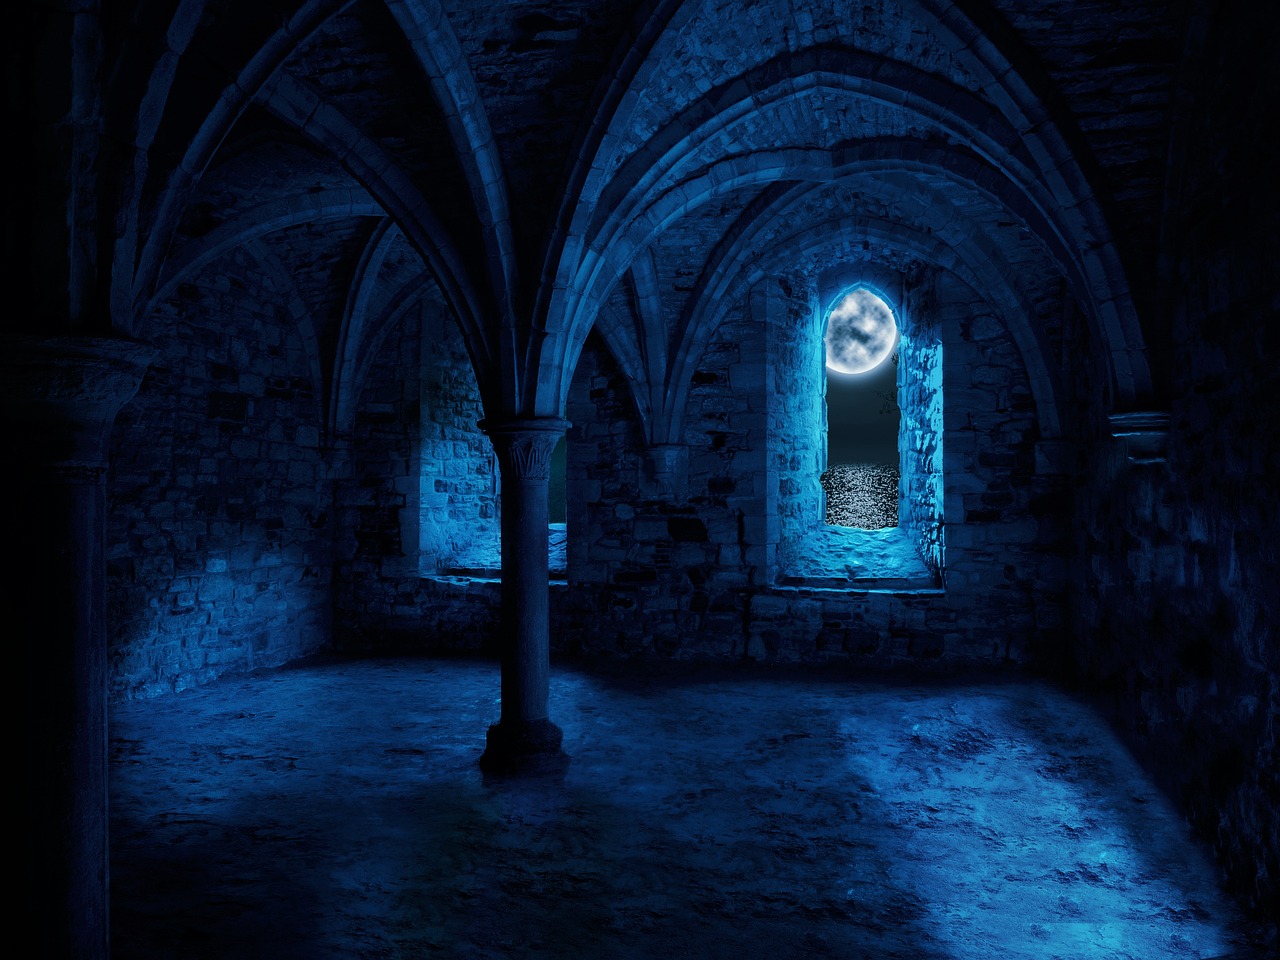 a dimly lit room with a moon in the window, shutterstock, romanesque, with glowing blue lights, deep halls, set photo